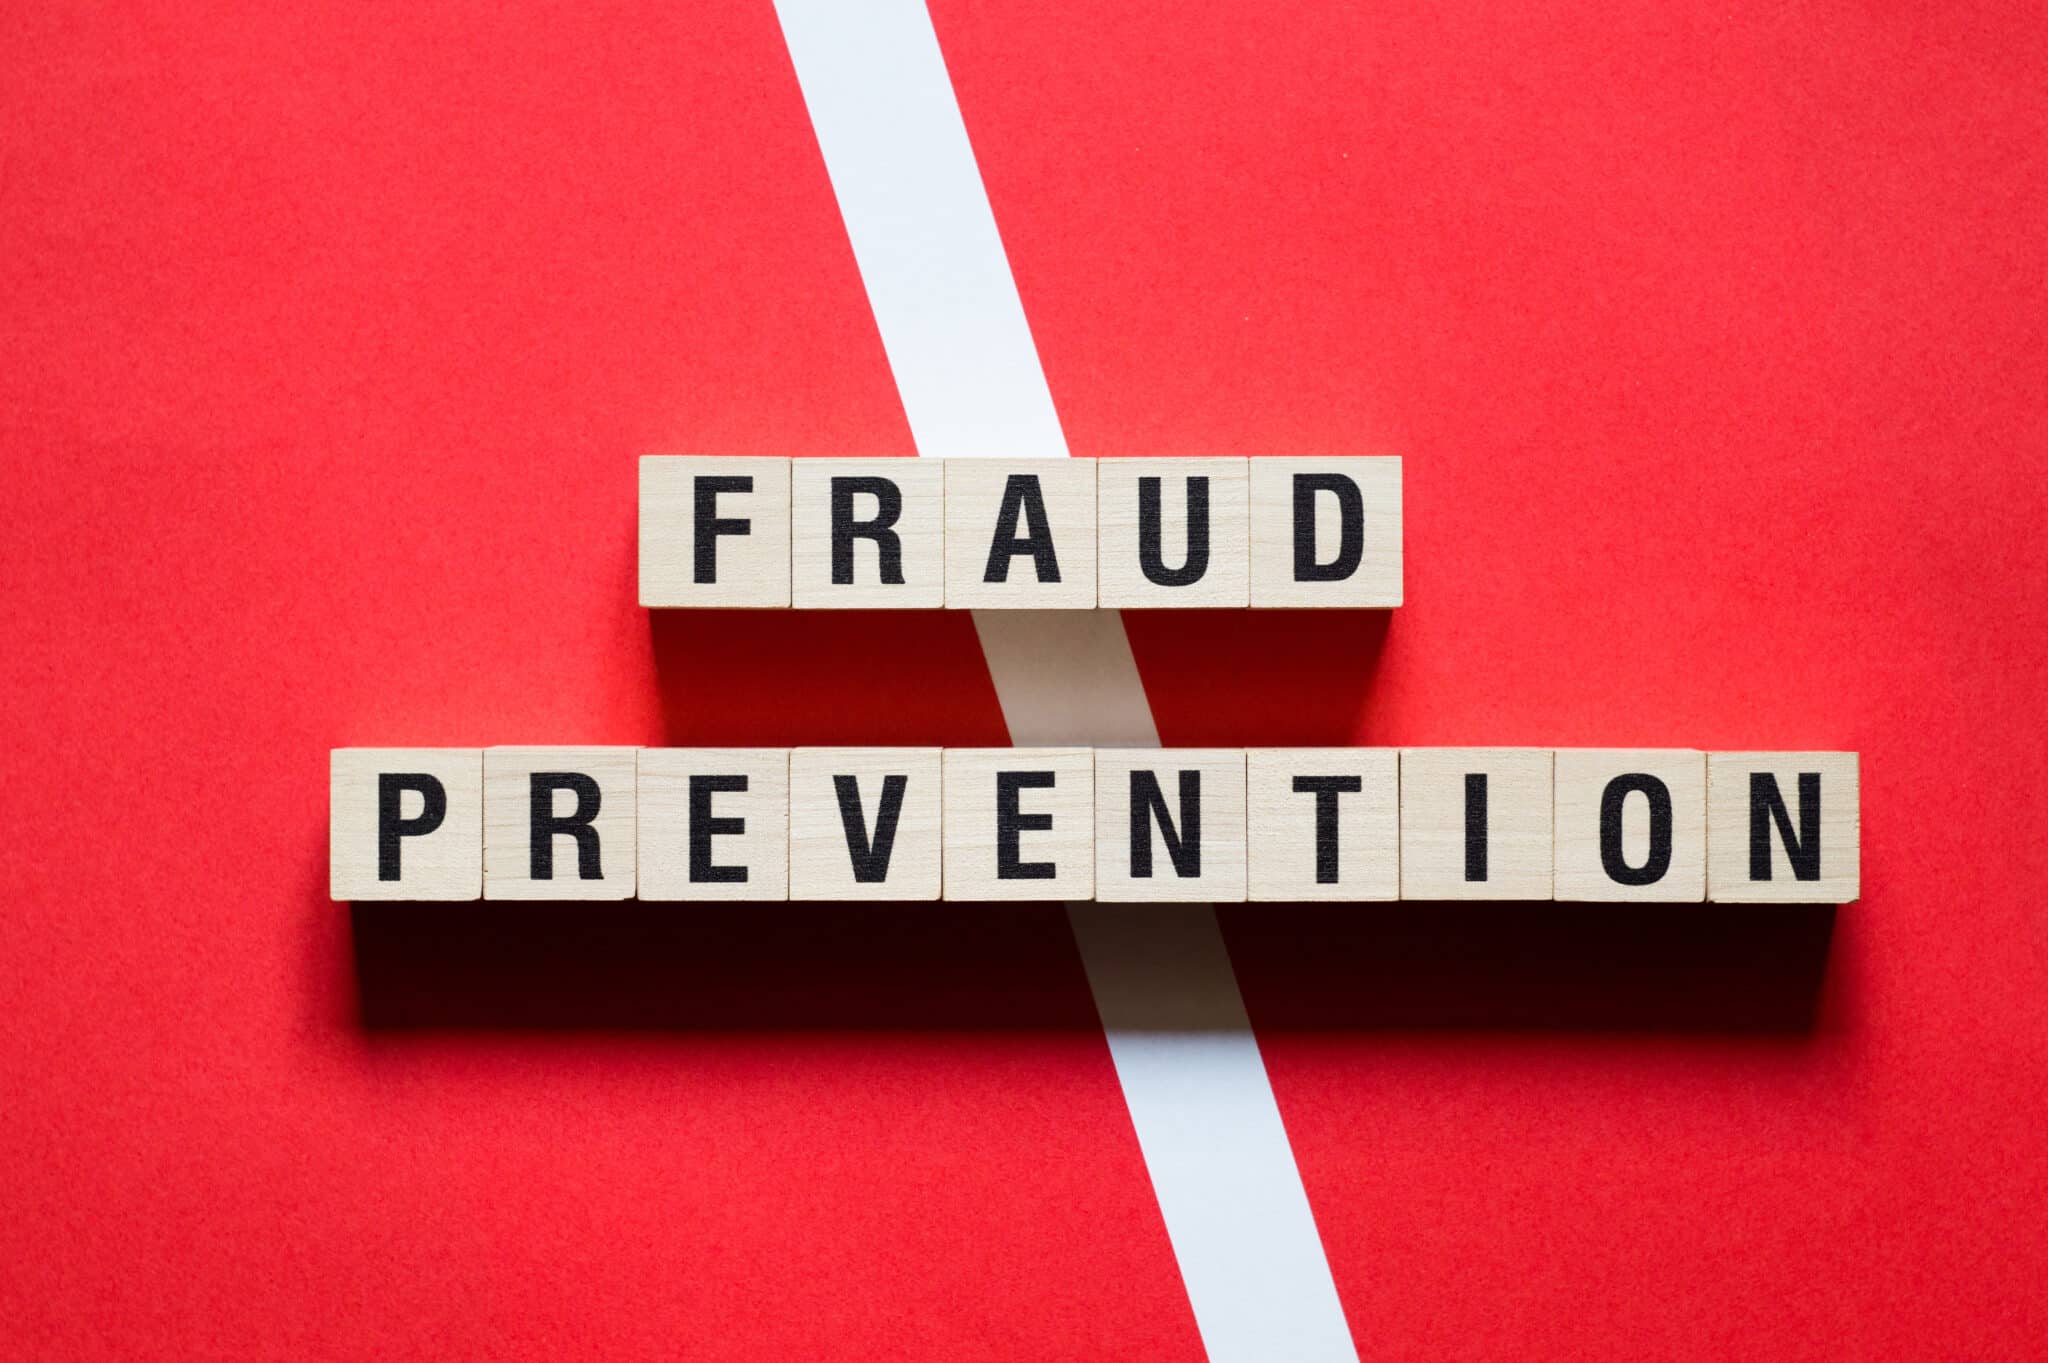 Cubes spell 'Fraud Prevention,' symbolizing the role of insurance transcription to combat fraud.